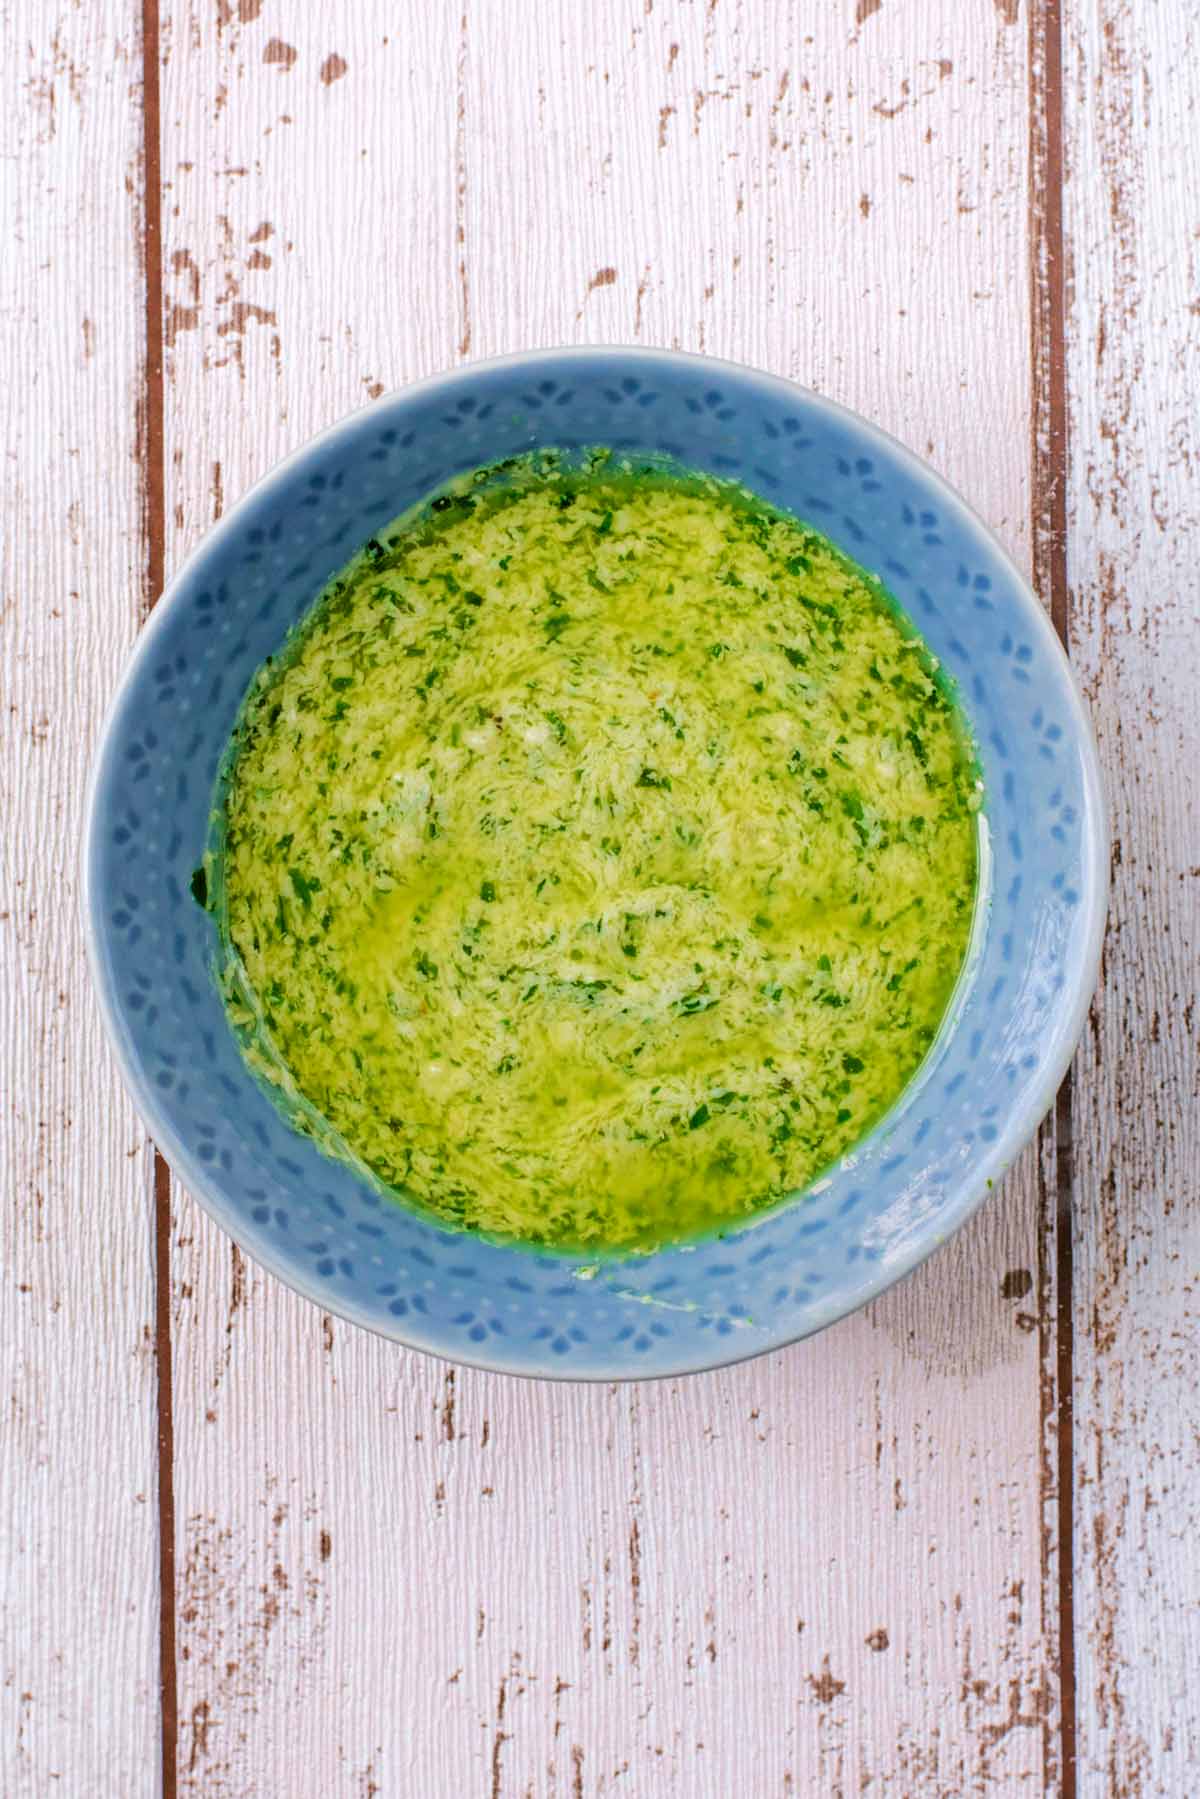 a green and yellow coloured sauce in a small blue bowl.